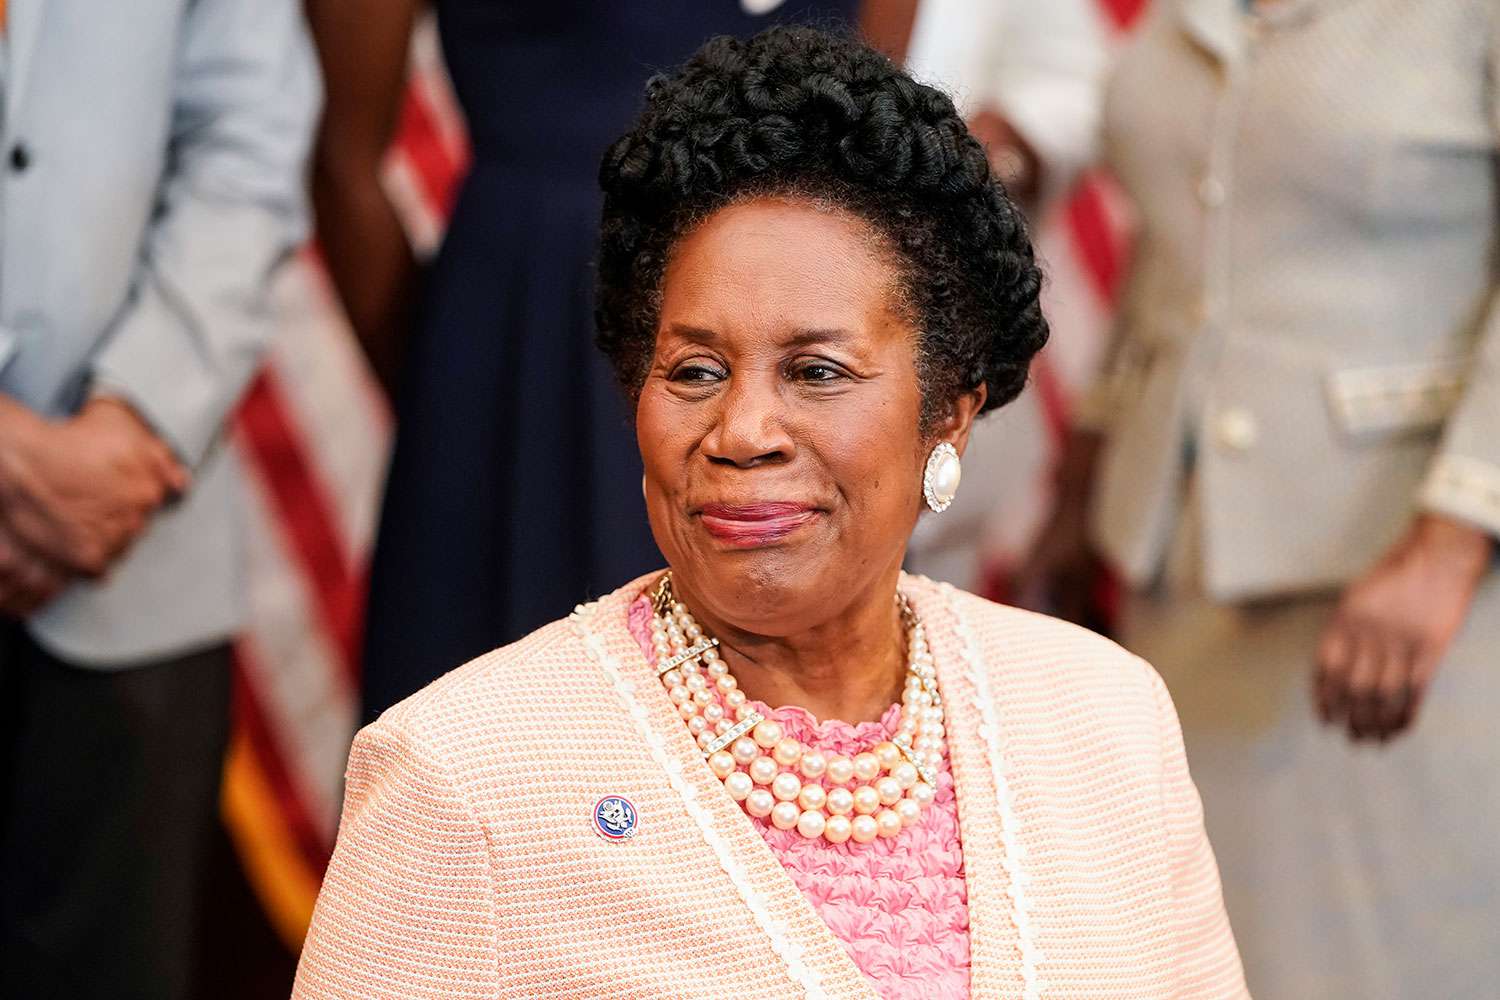 Congresswoman Sheila Jackson Lee Reveals Pancreatic Cancer Diagnosis: 'The Road Ahead Will Not Be Easy'